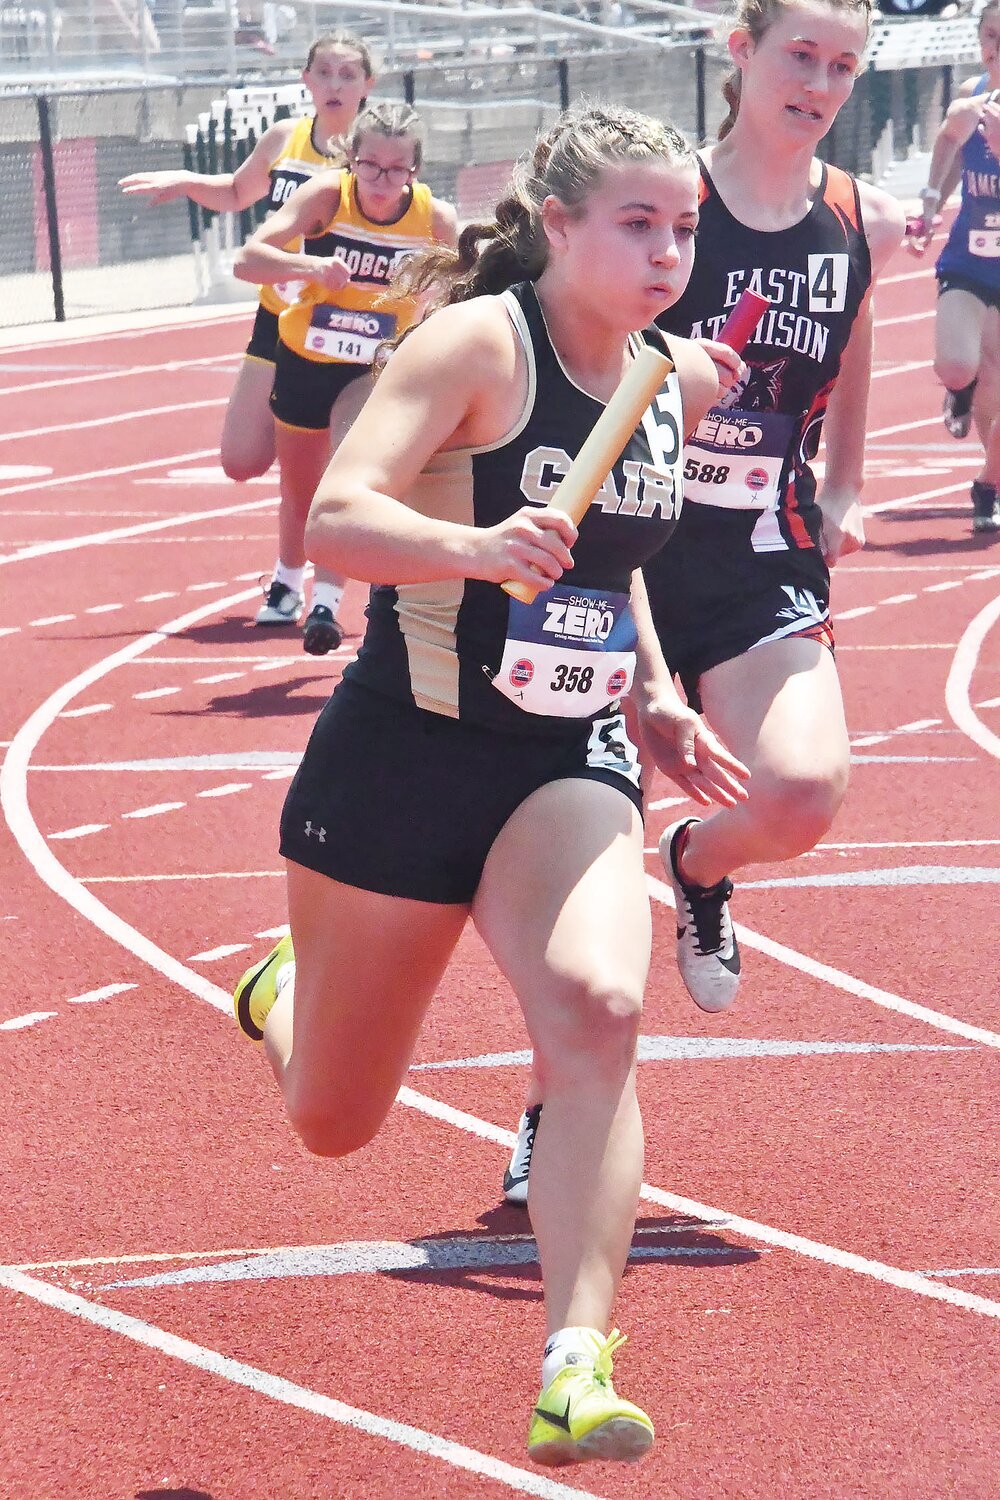 Olivia Cross rounds the curve with the baton during the Class 1 4x200-meter relay at the Class 1 state track and field meet in Jefferson City on Saturday, May 20.